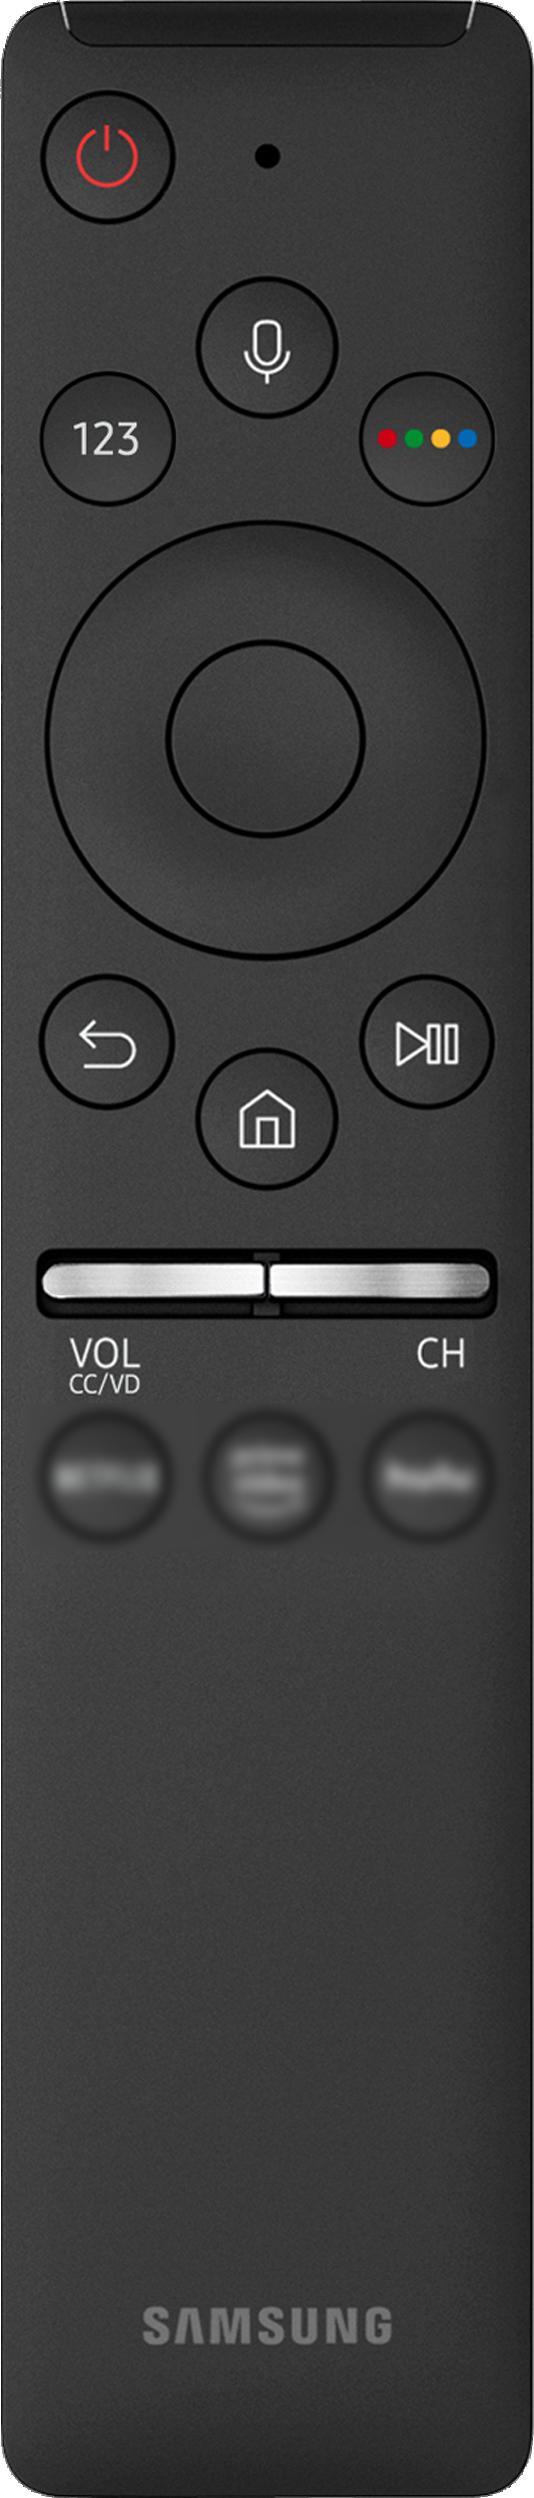 About the Samsung Smart Remote (UHD TV) Learn about the